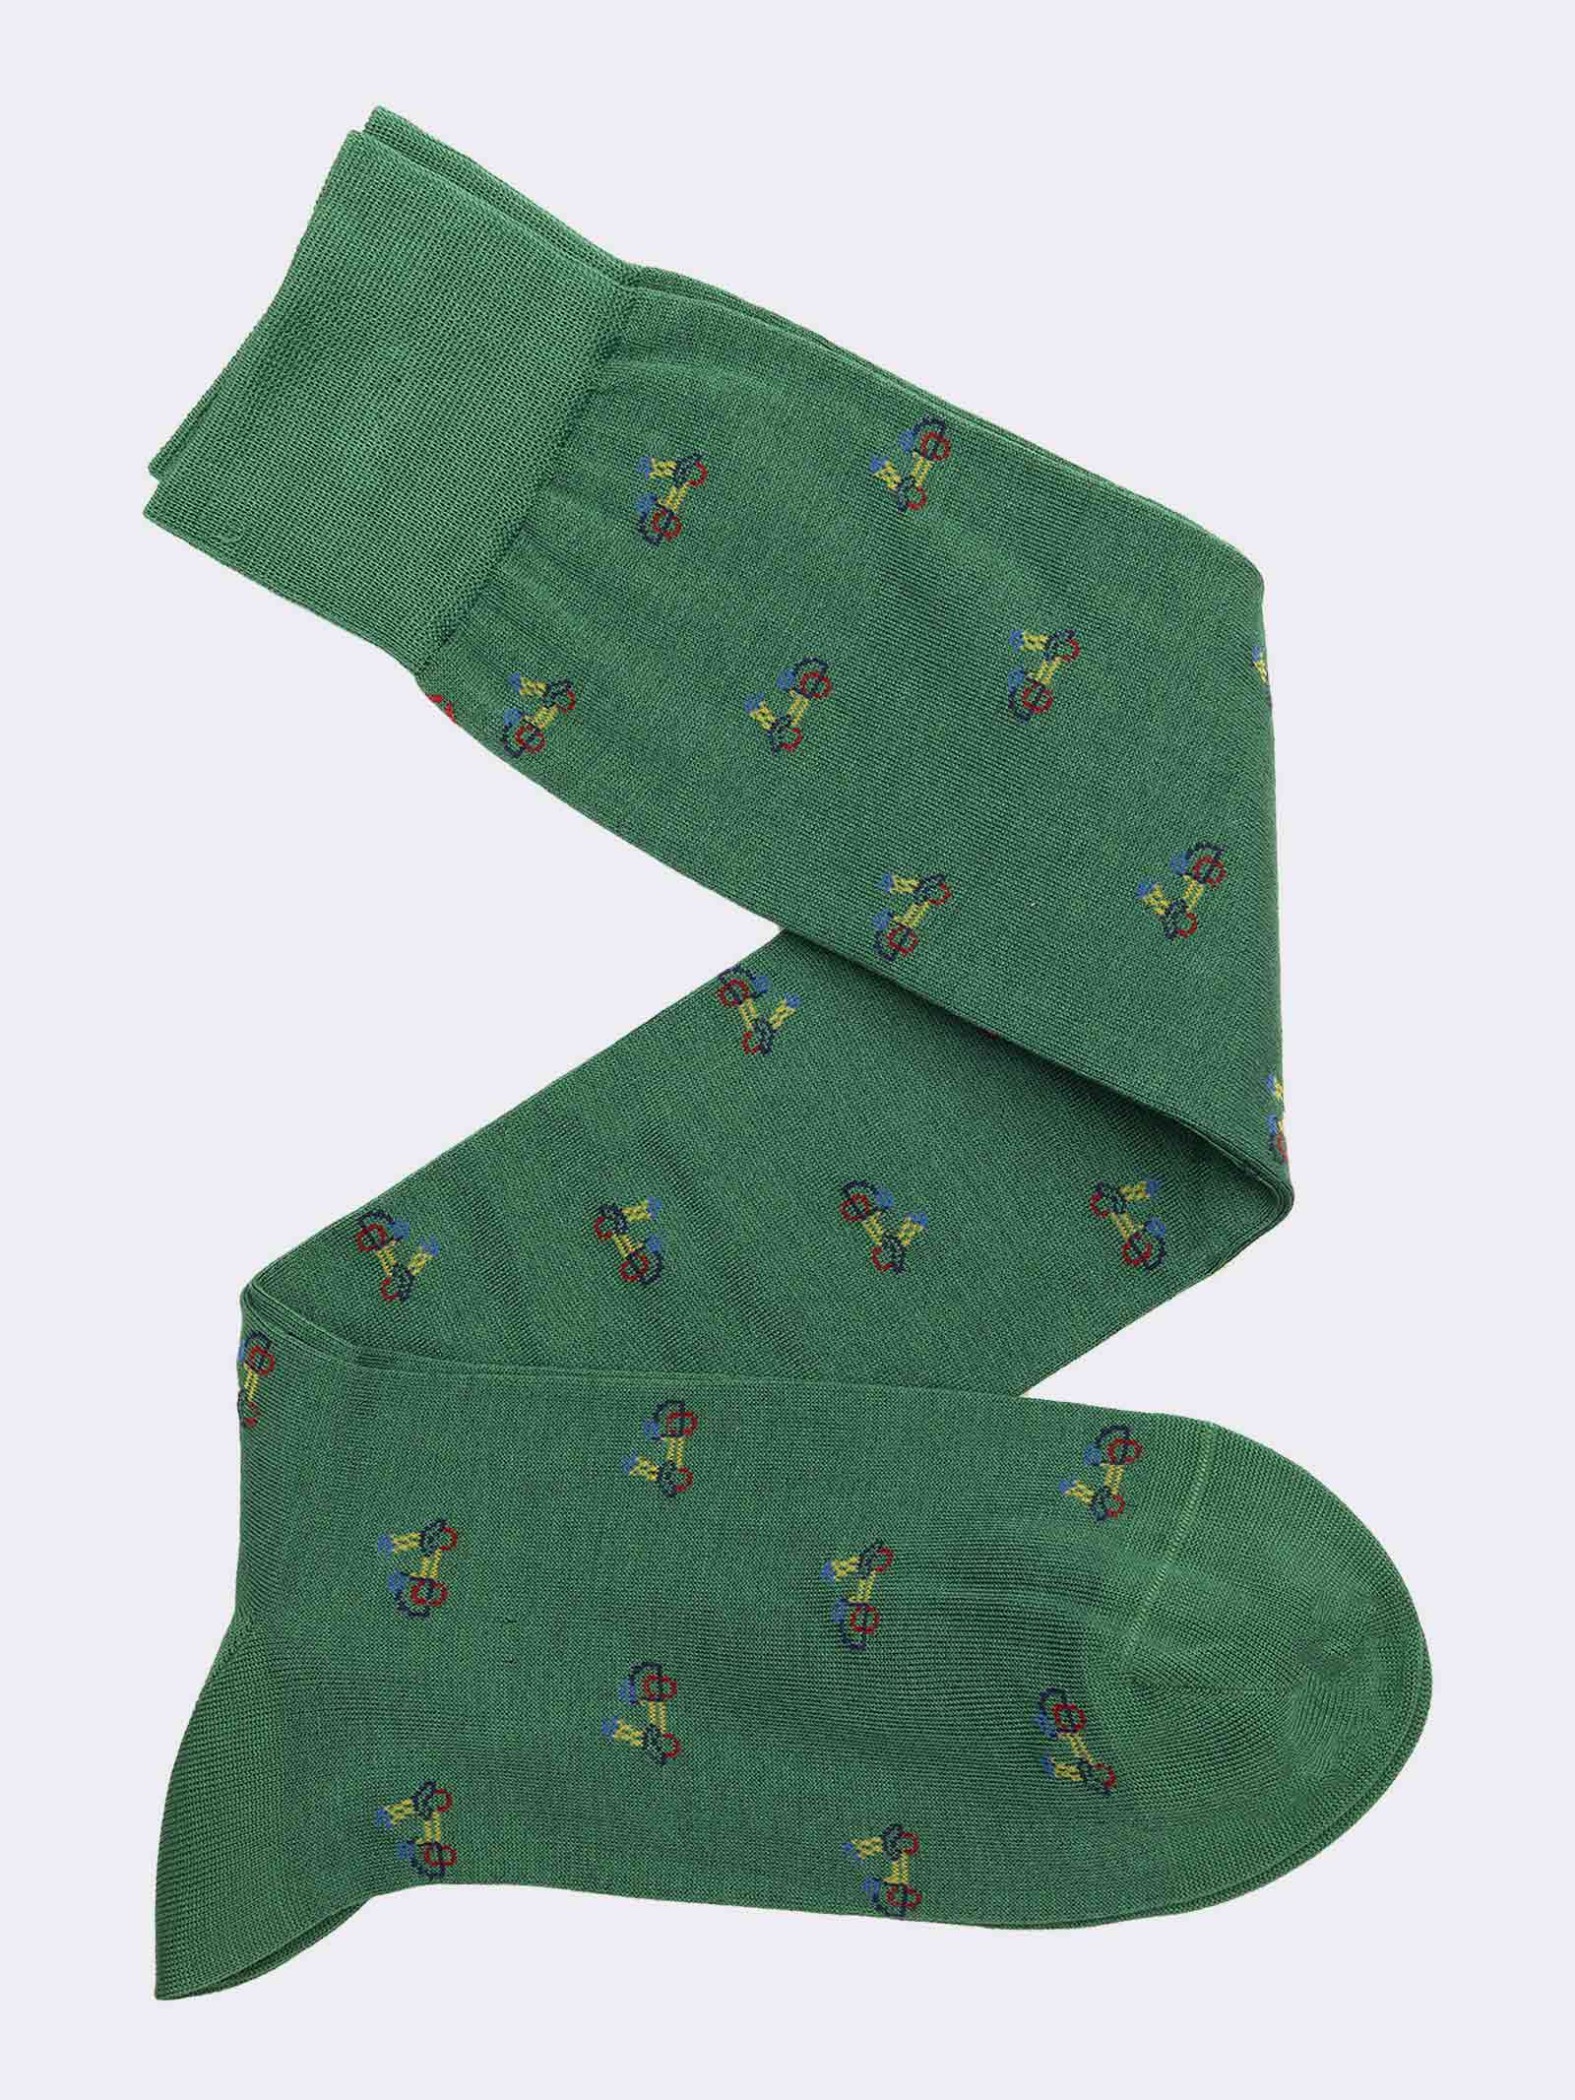 Men's Vespa patterned knee-high socks in cool cotton - Made in Italy